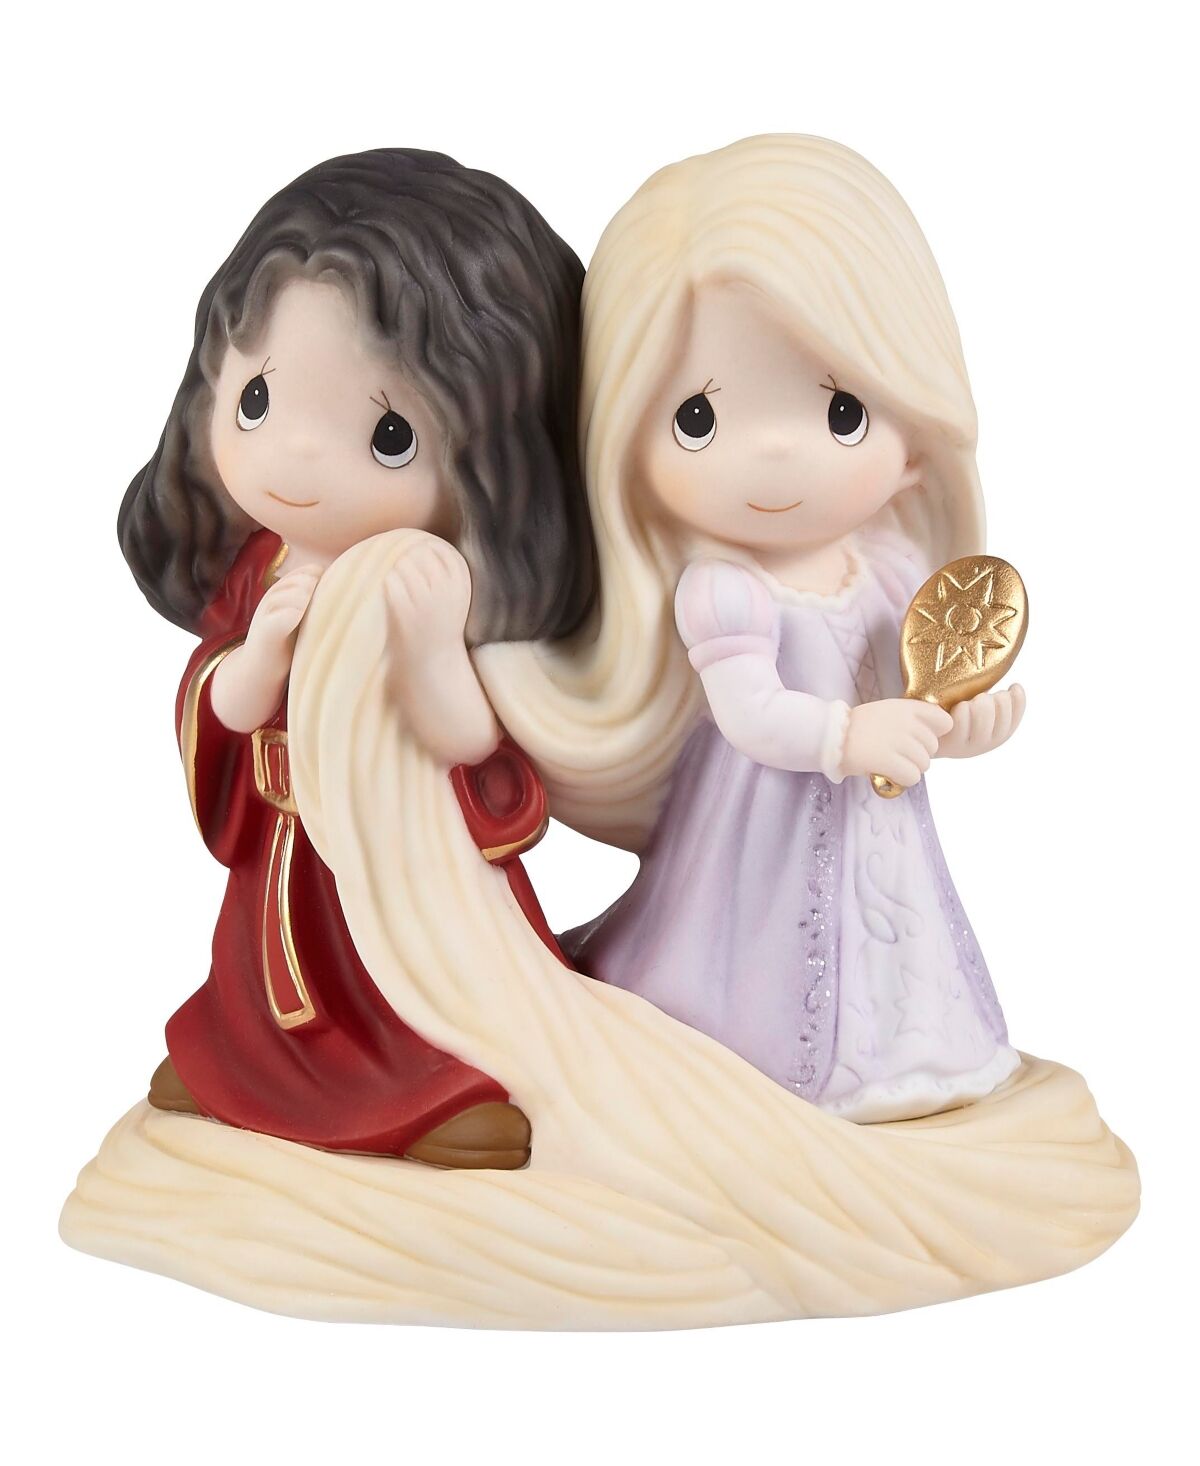 Precious Moments 221042 Disney Tangled Hold on to Your Dreams Bisque Porcelain Figurine - Multicolor